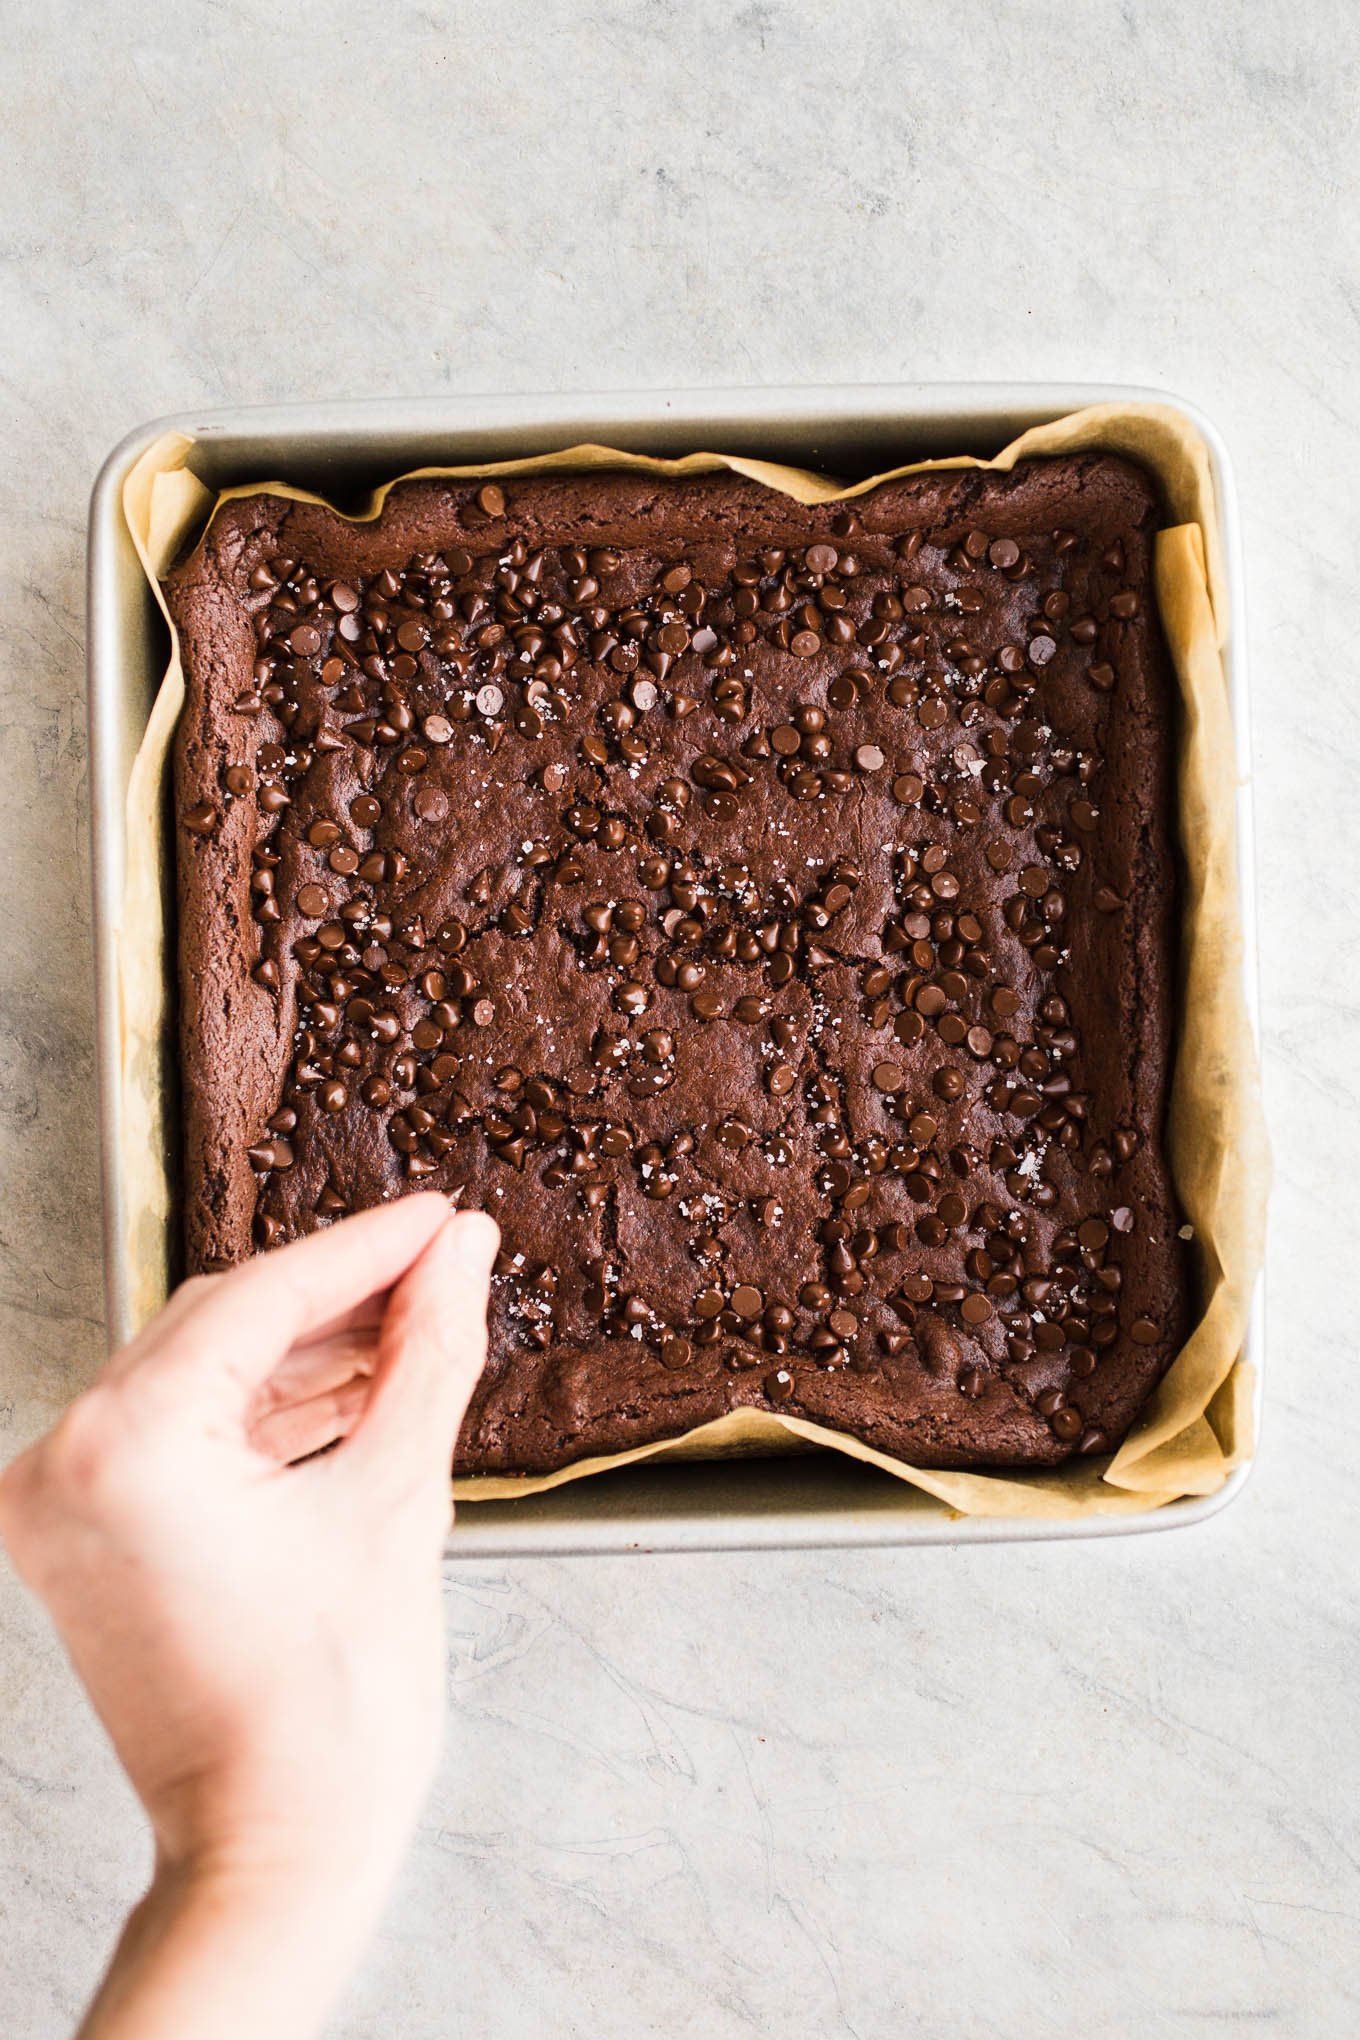 Vegan Tahini Brownies made with rich cocoa powder, tahini, maple syrup, chocolate chips, and sea salt. Gluten-free. 